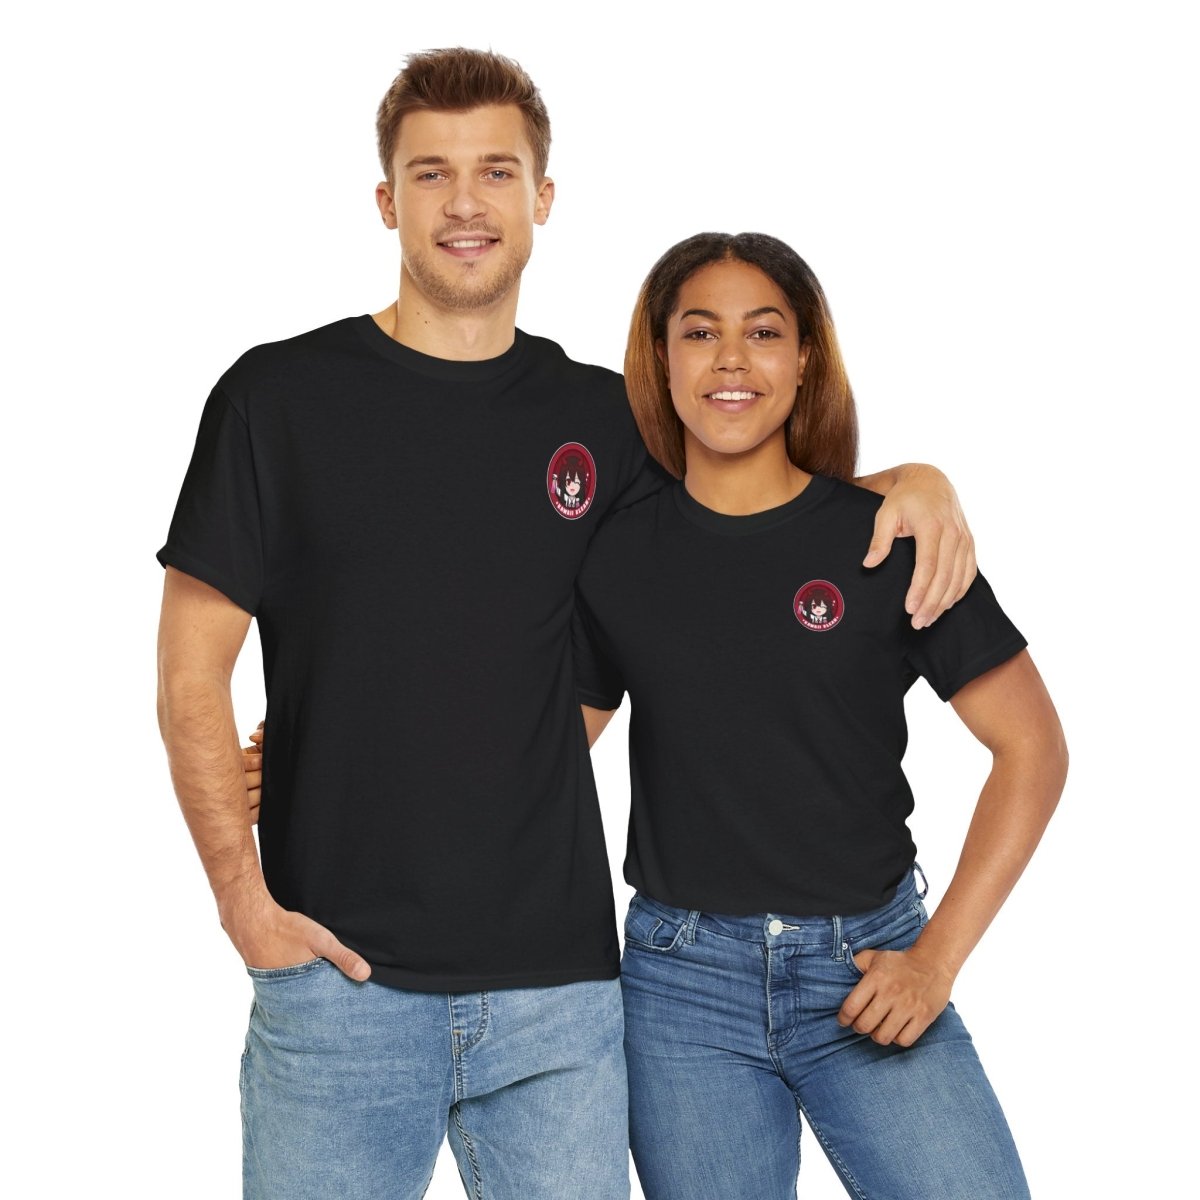 Male and female models posing together in black T-shirts adorned with a red 'Kawaii Klean' logo on the left chest, showcasing the striking contrast and versatile style.